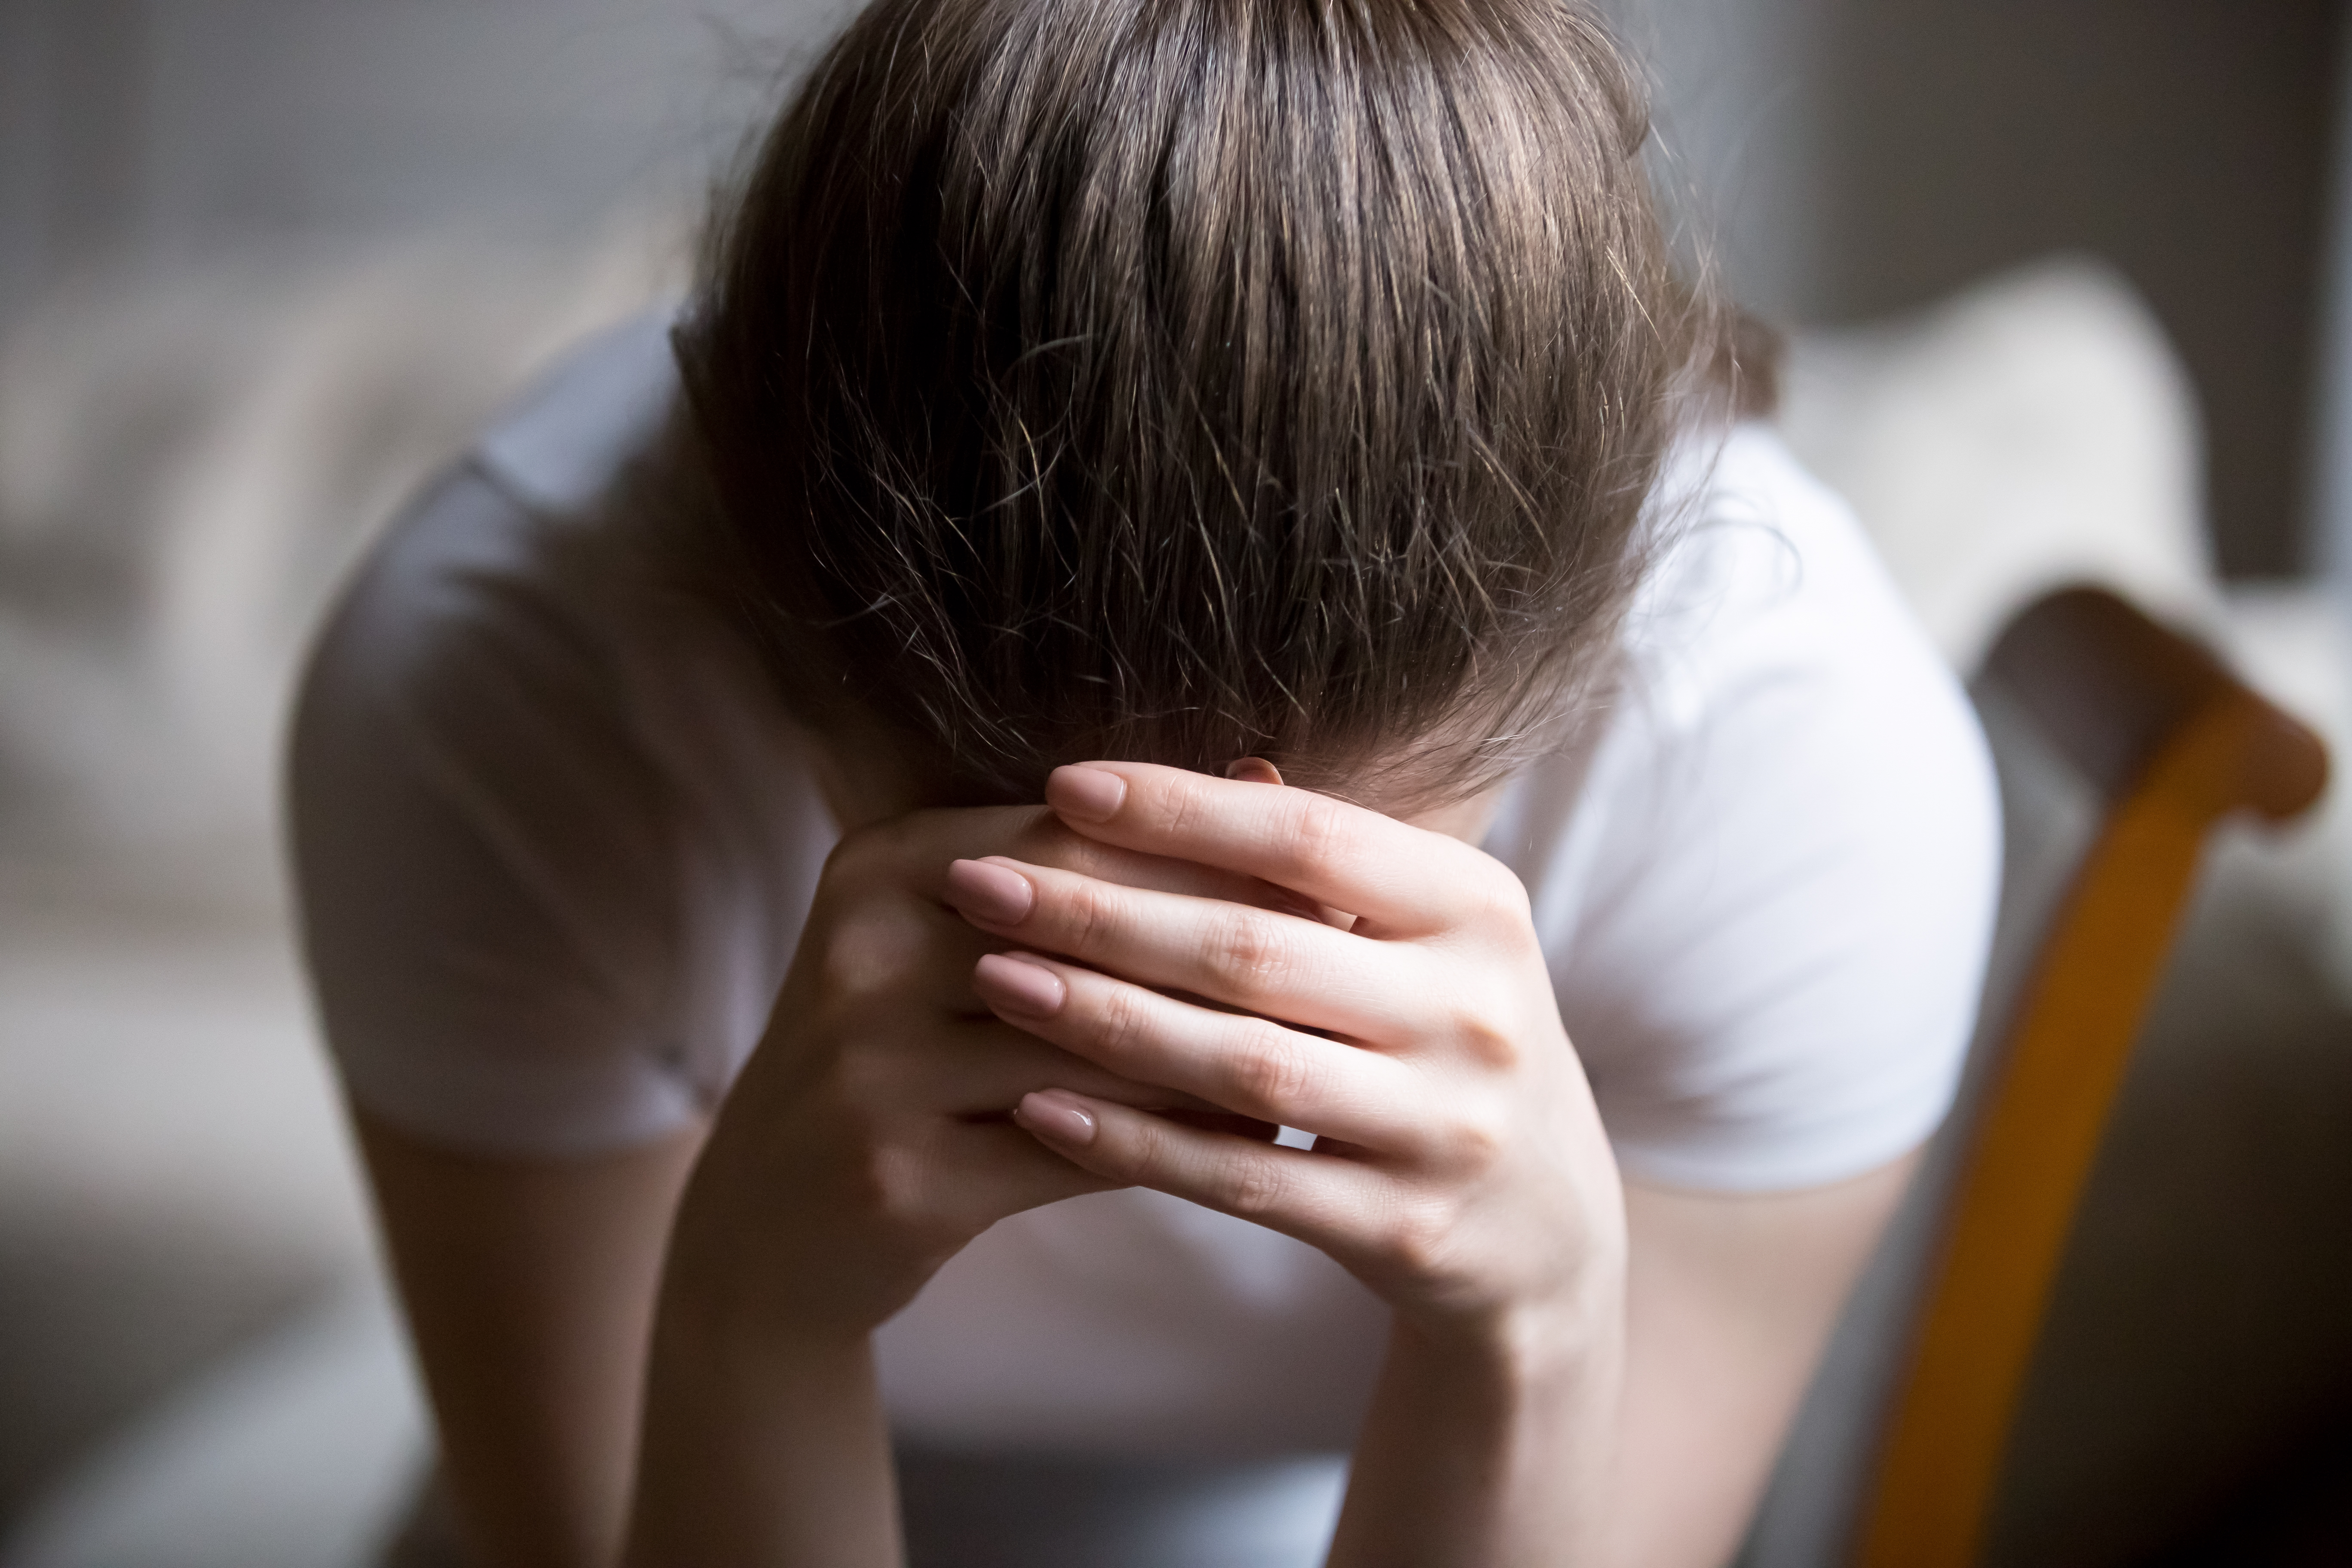 A depressed young woman crying at home | Source: Shutterstock